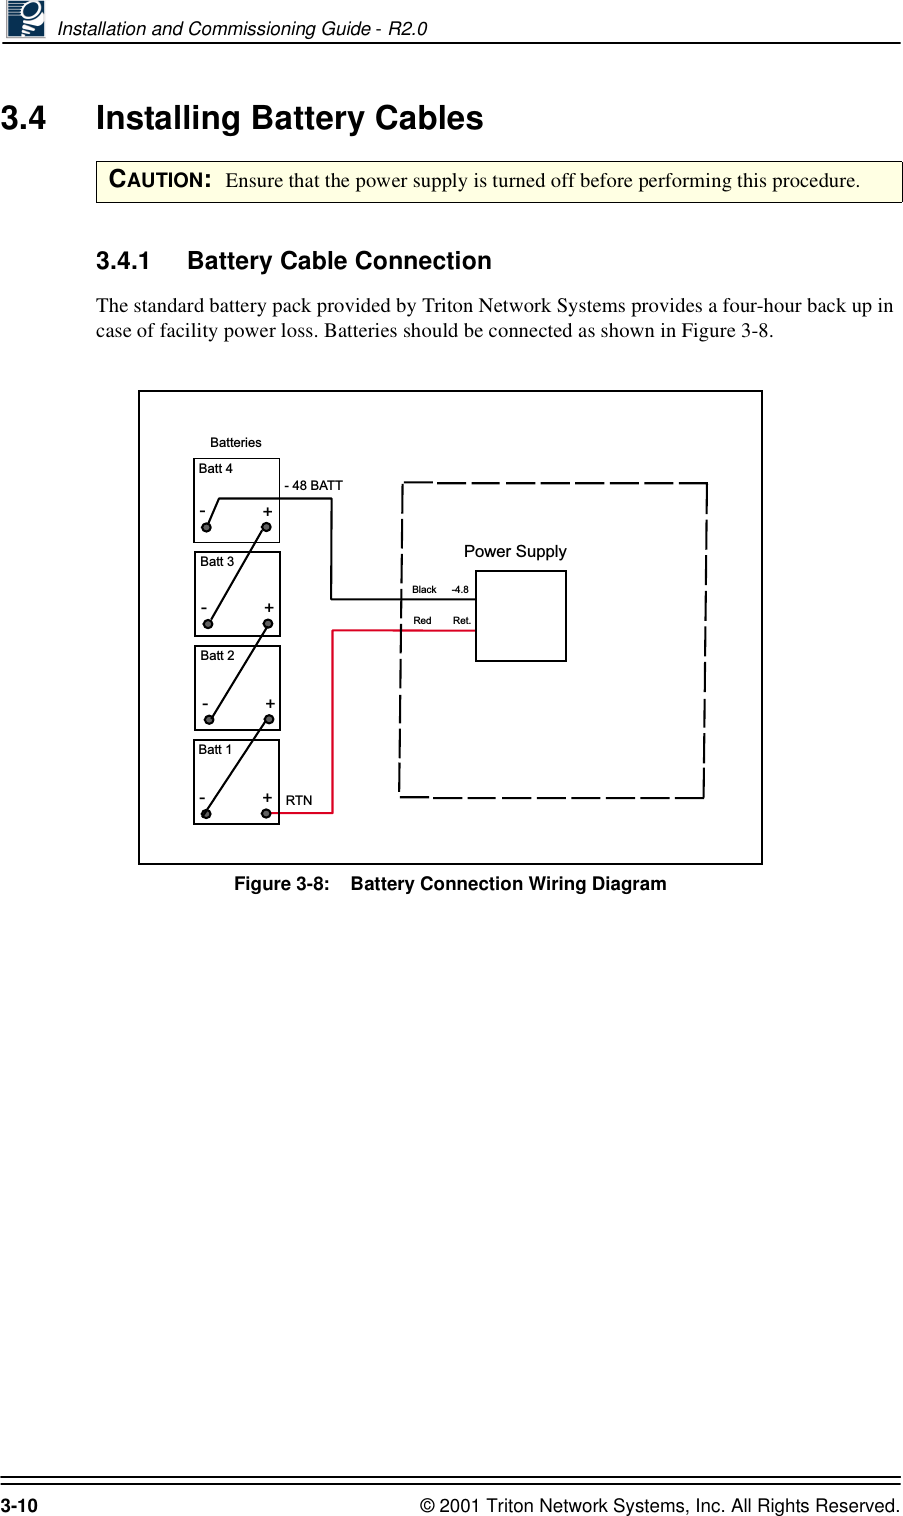  Installation and Commissioning Guide - R2.03-10 © 2001 Triton Network Systems, Inc. All Rights Reserved.3.4 Installing Battery Cables3.4.1 Battery Cable ConnectionThe standard battery pack provided by Triton Network Systems provides a four-hour back up in case of facility power loss. Batteries should be connected as shown in Figure 3-8.Figure 3-8:    Battery Connection Wiring DiagramCAUTION:  Ensure that the power supply is turned off before performing this procedure.RTN- 48 BATTBatteriesRed+-+-+-+-BlackRet.-4.8Batt 1Batt 2Batt 3Batt 4Power Supply